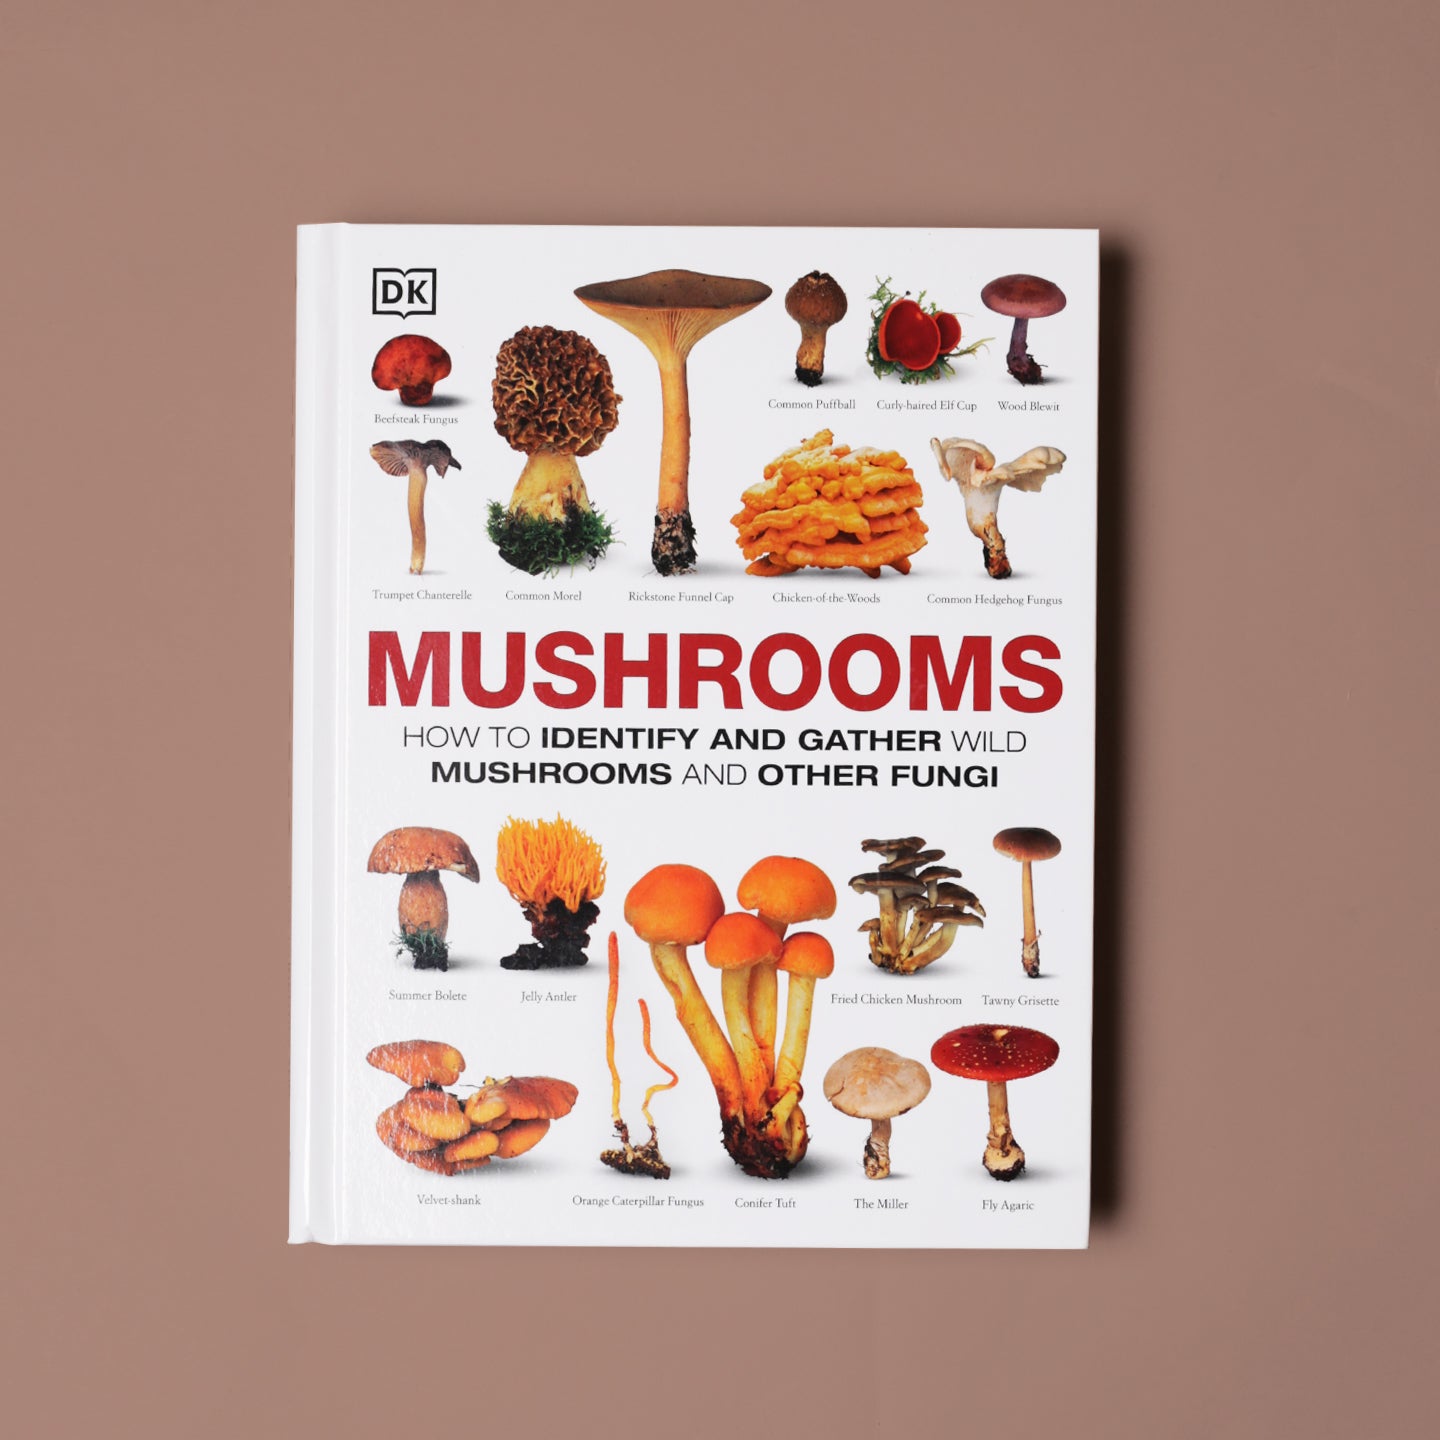 Mushrooms - How to Identify and Gather Wild Mushrooms and Other Fungi